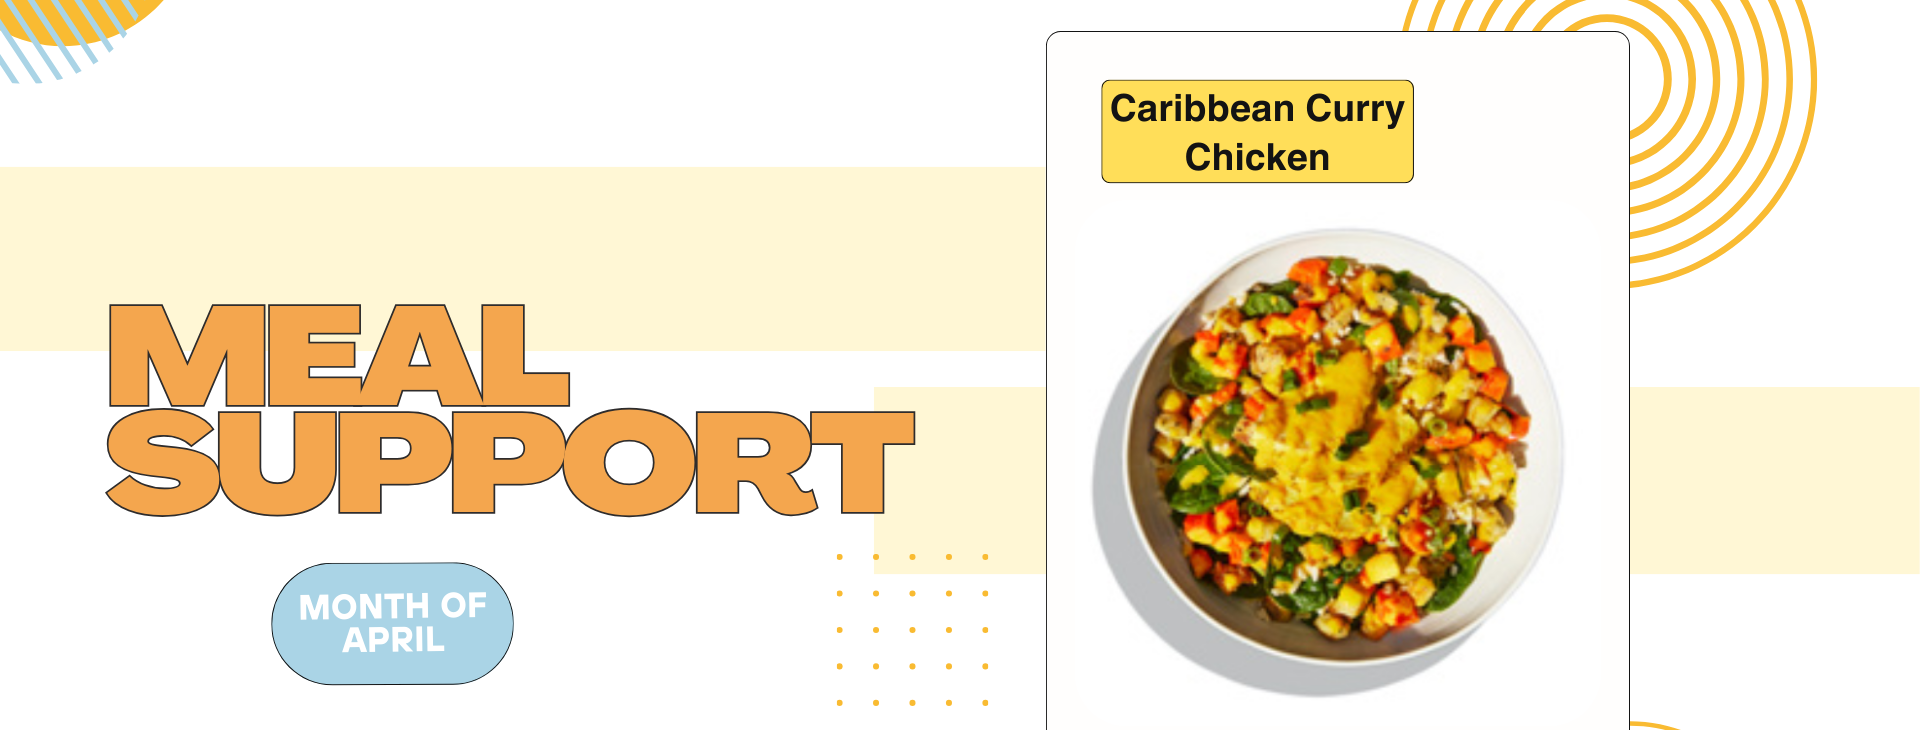 Meal Support- Curry Chicken